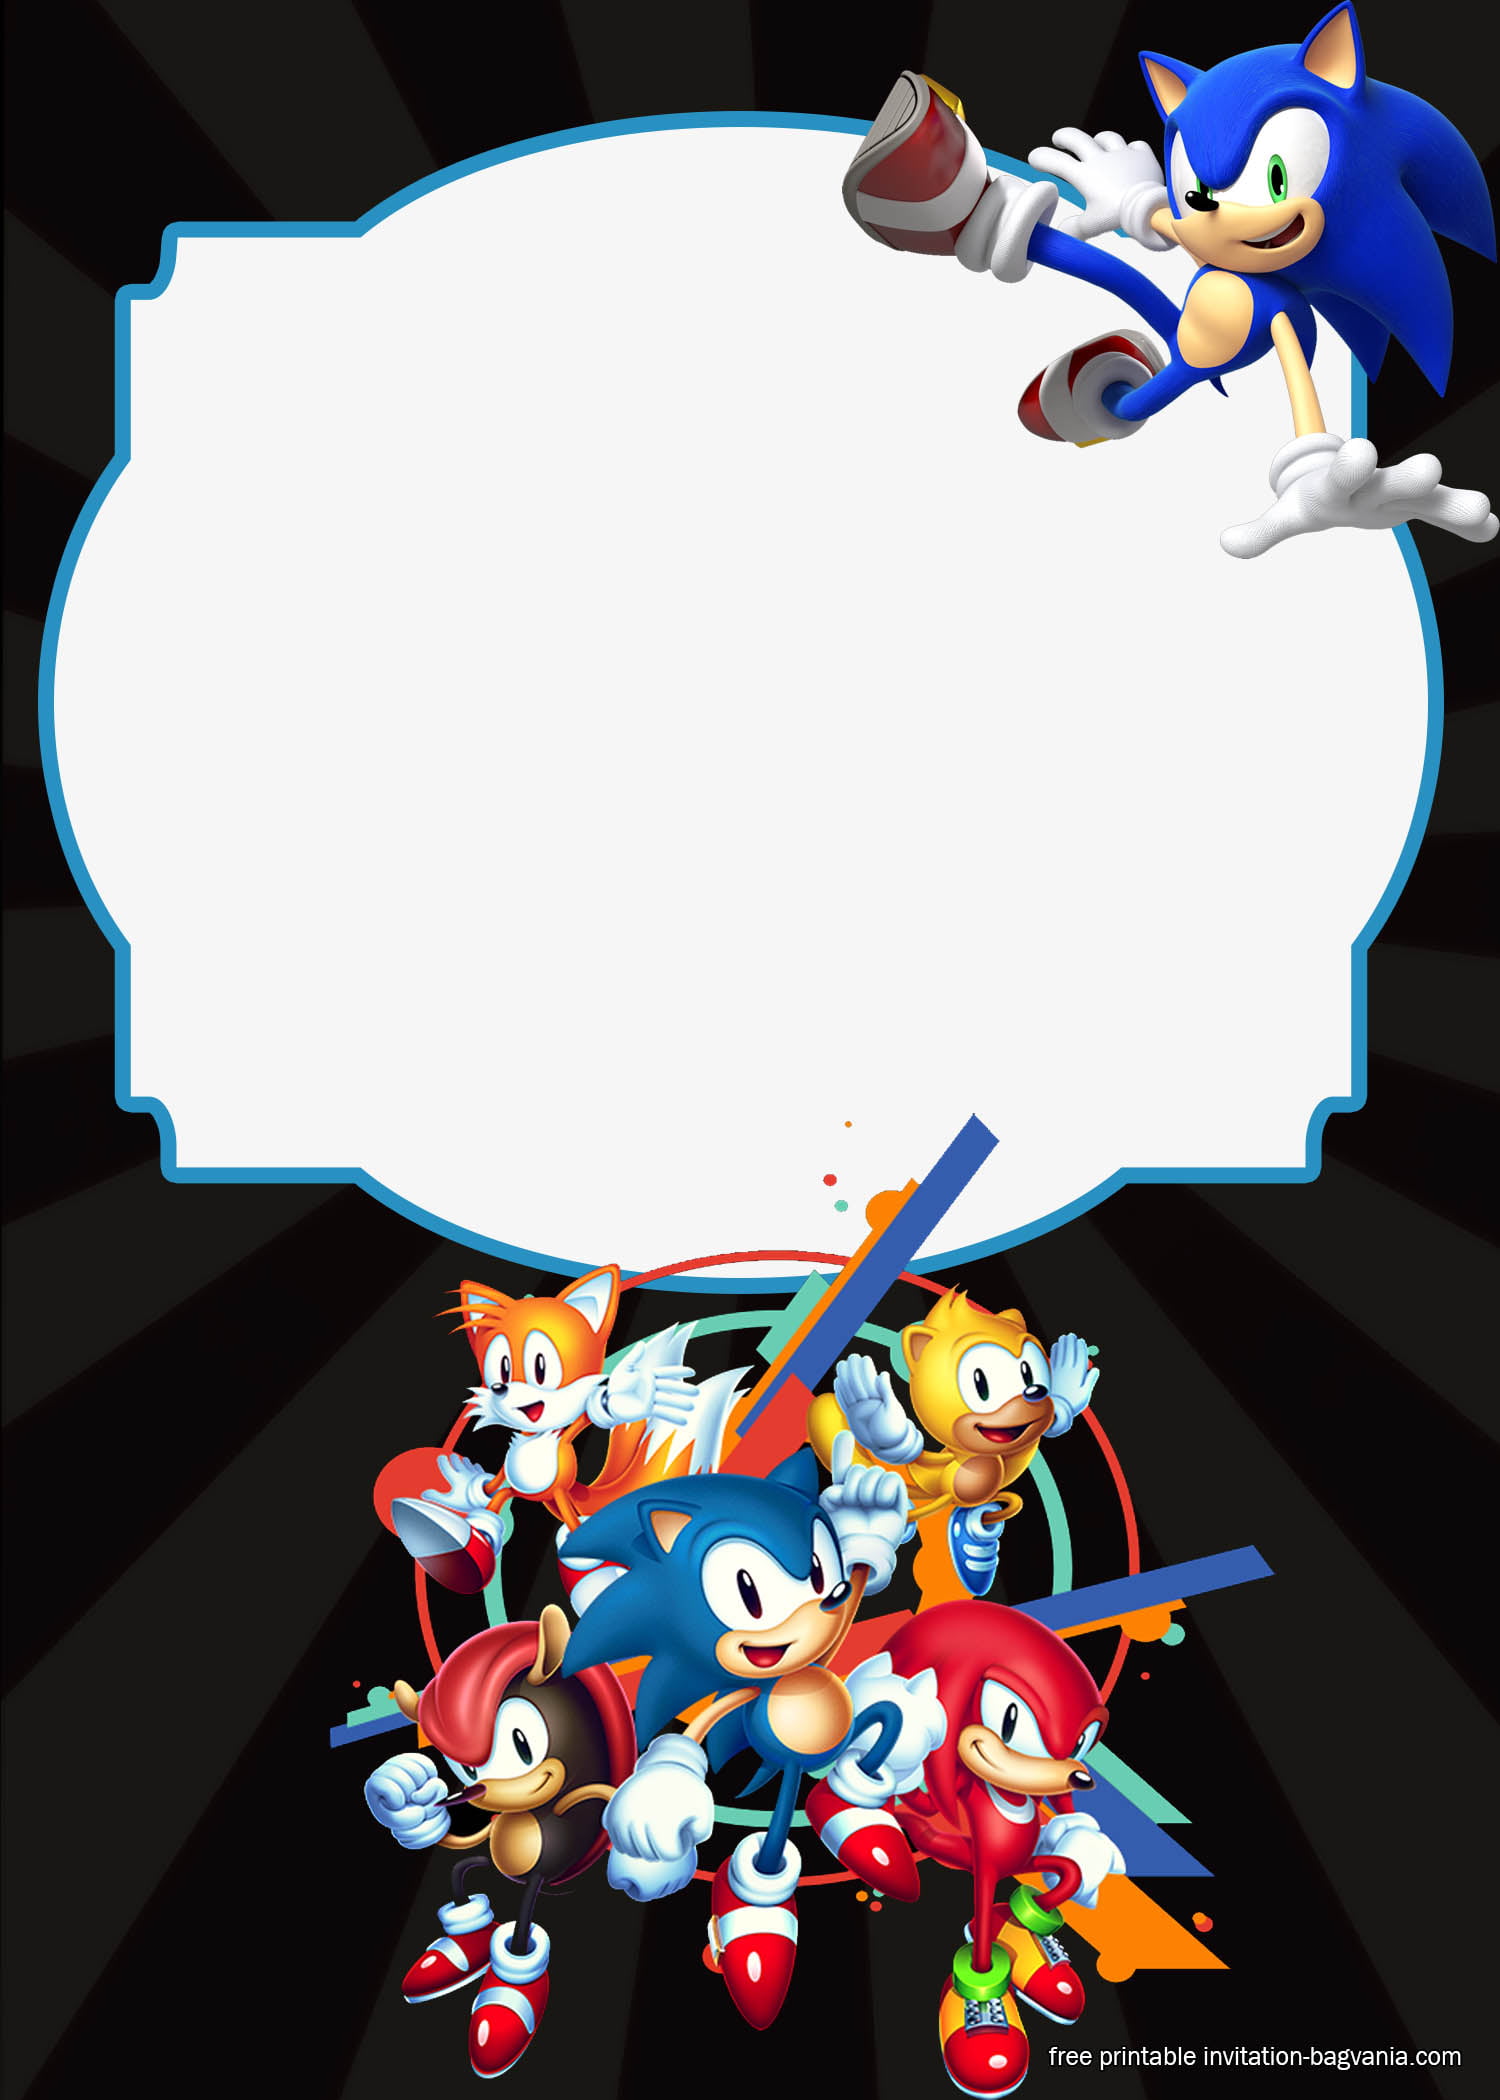 sonic-the-hedgehog-birthday-party-invitation-paper-party-supplies